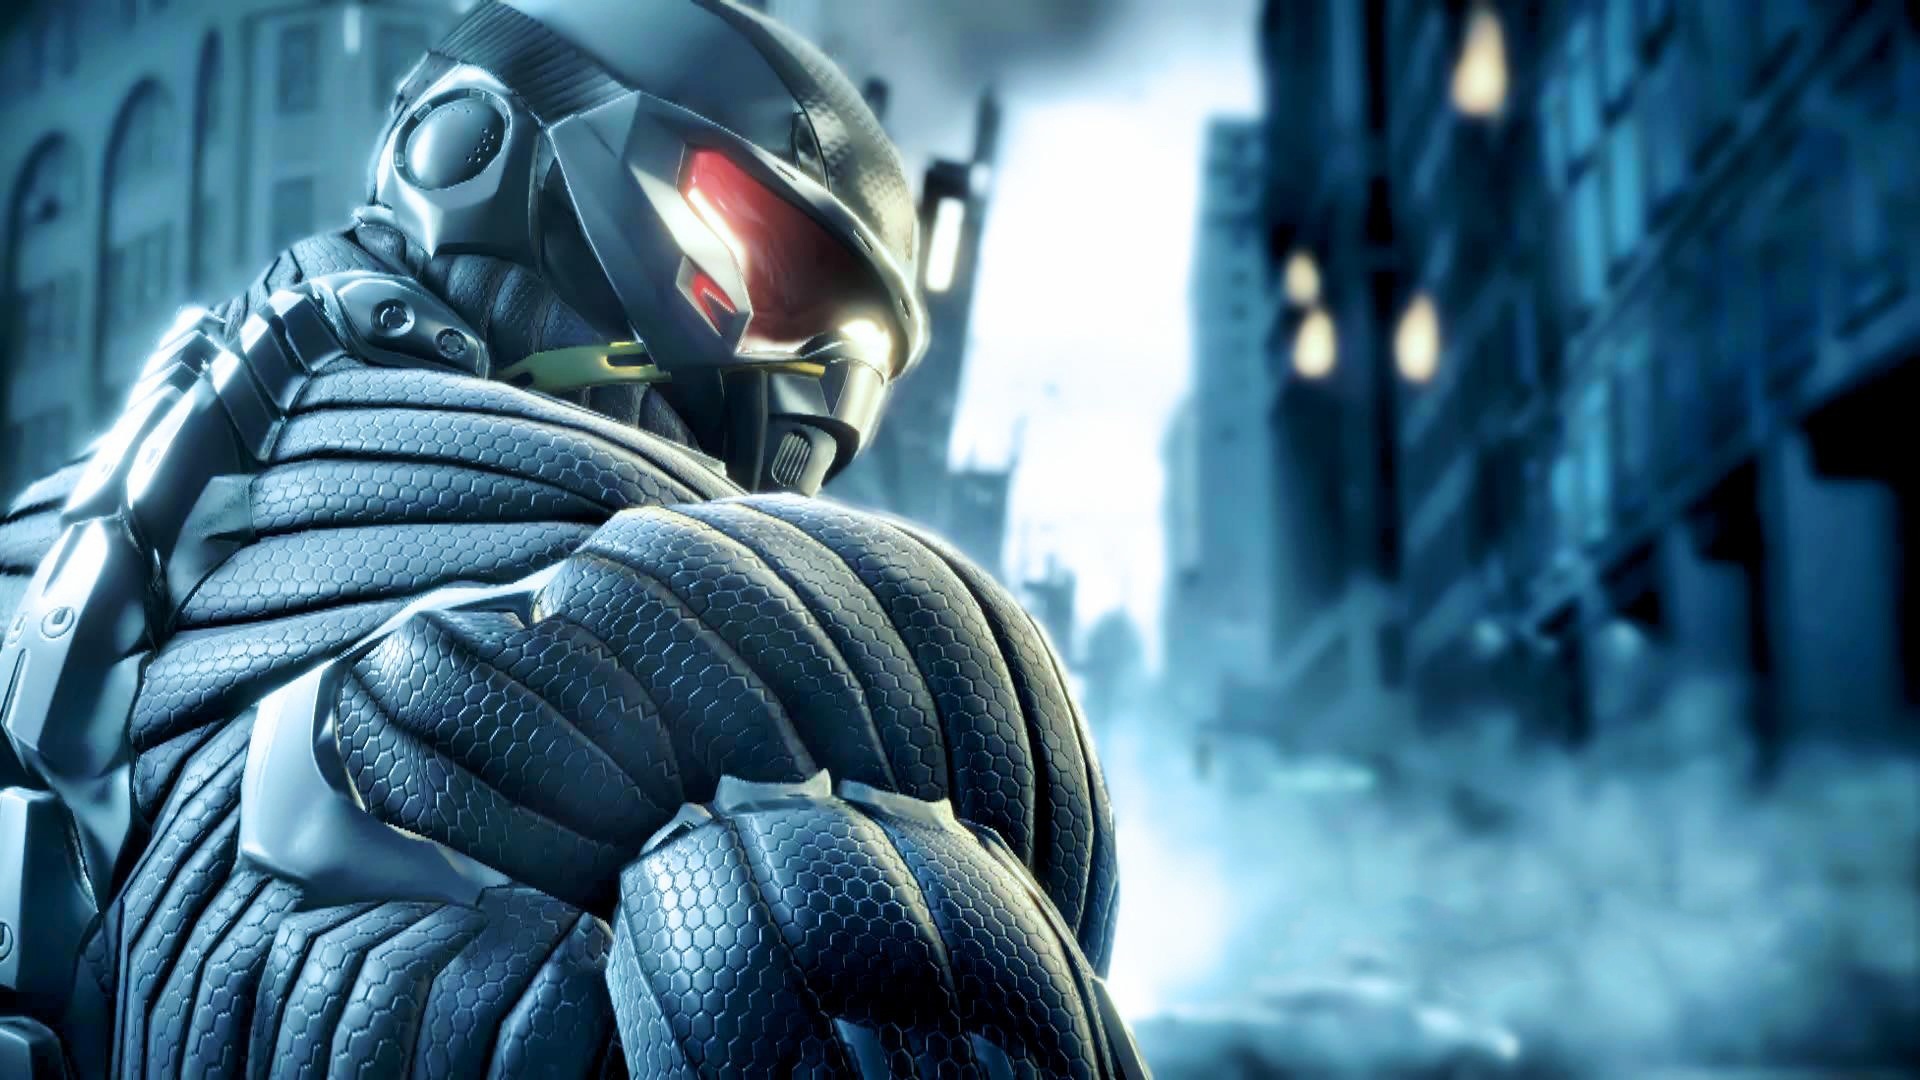 Crysis HD 1080p Wallpapers HD Wallpapers 1920x1080